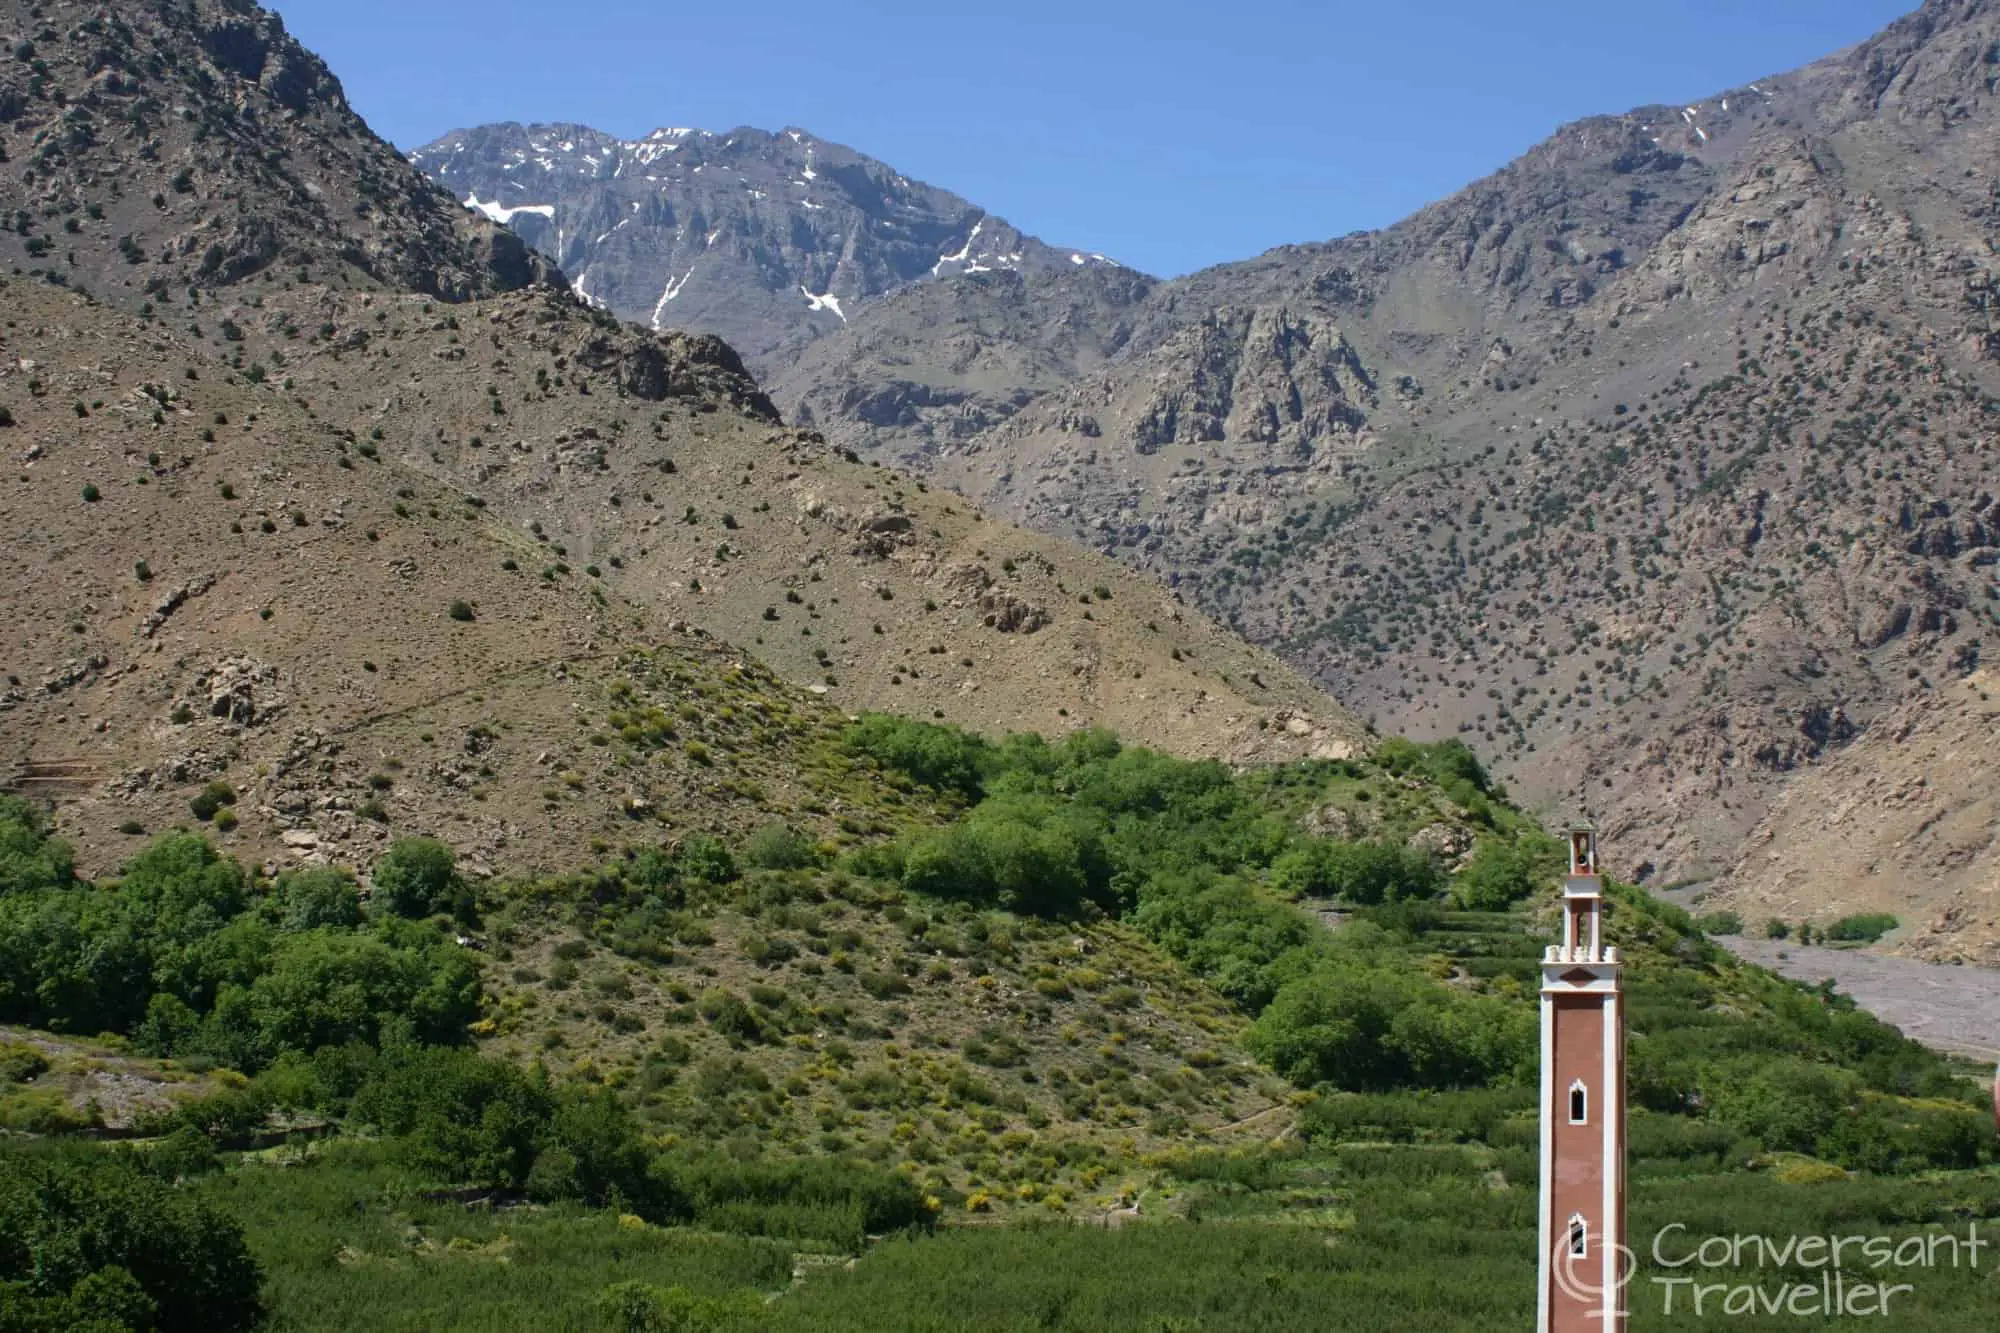 Looking up to Mount Toubkal, Imlil, Morocco